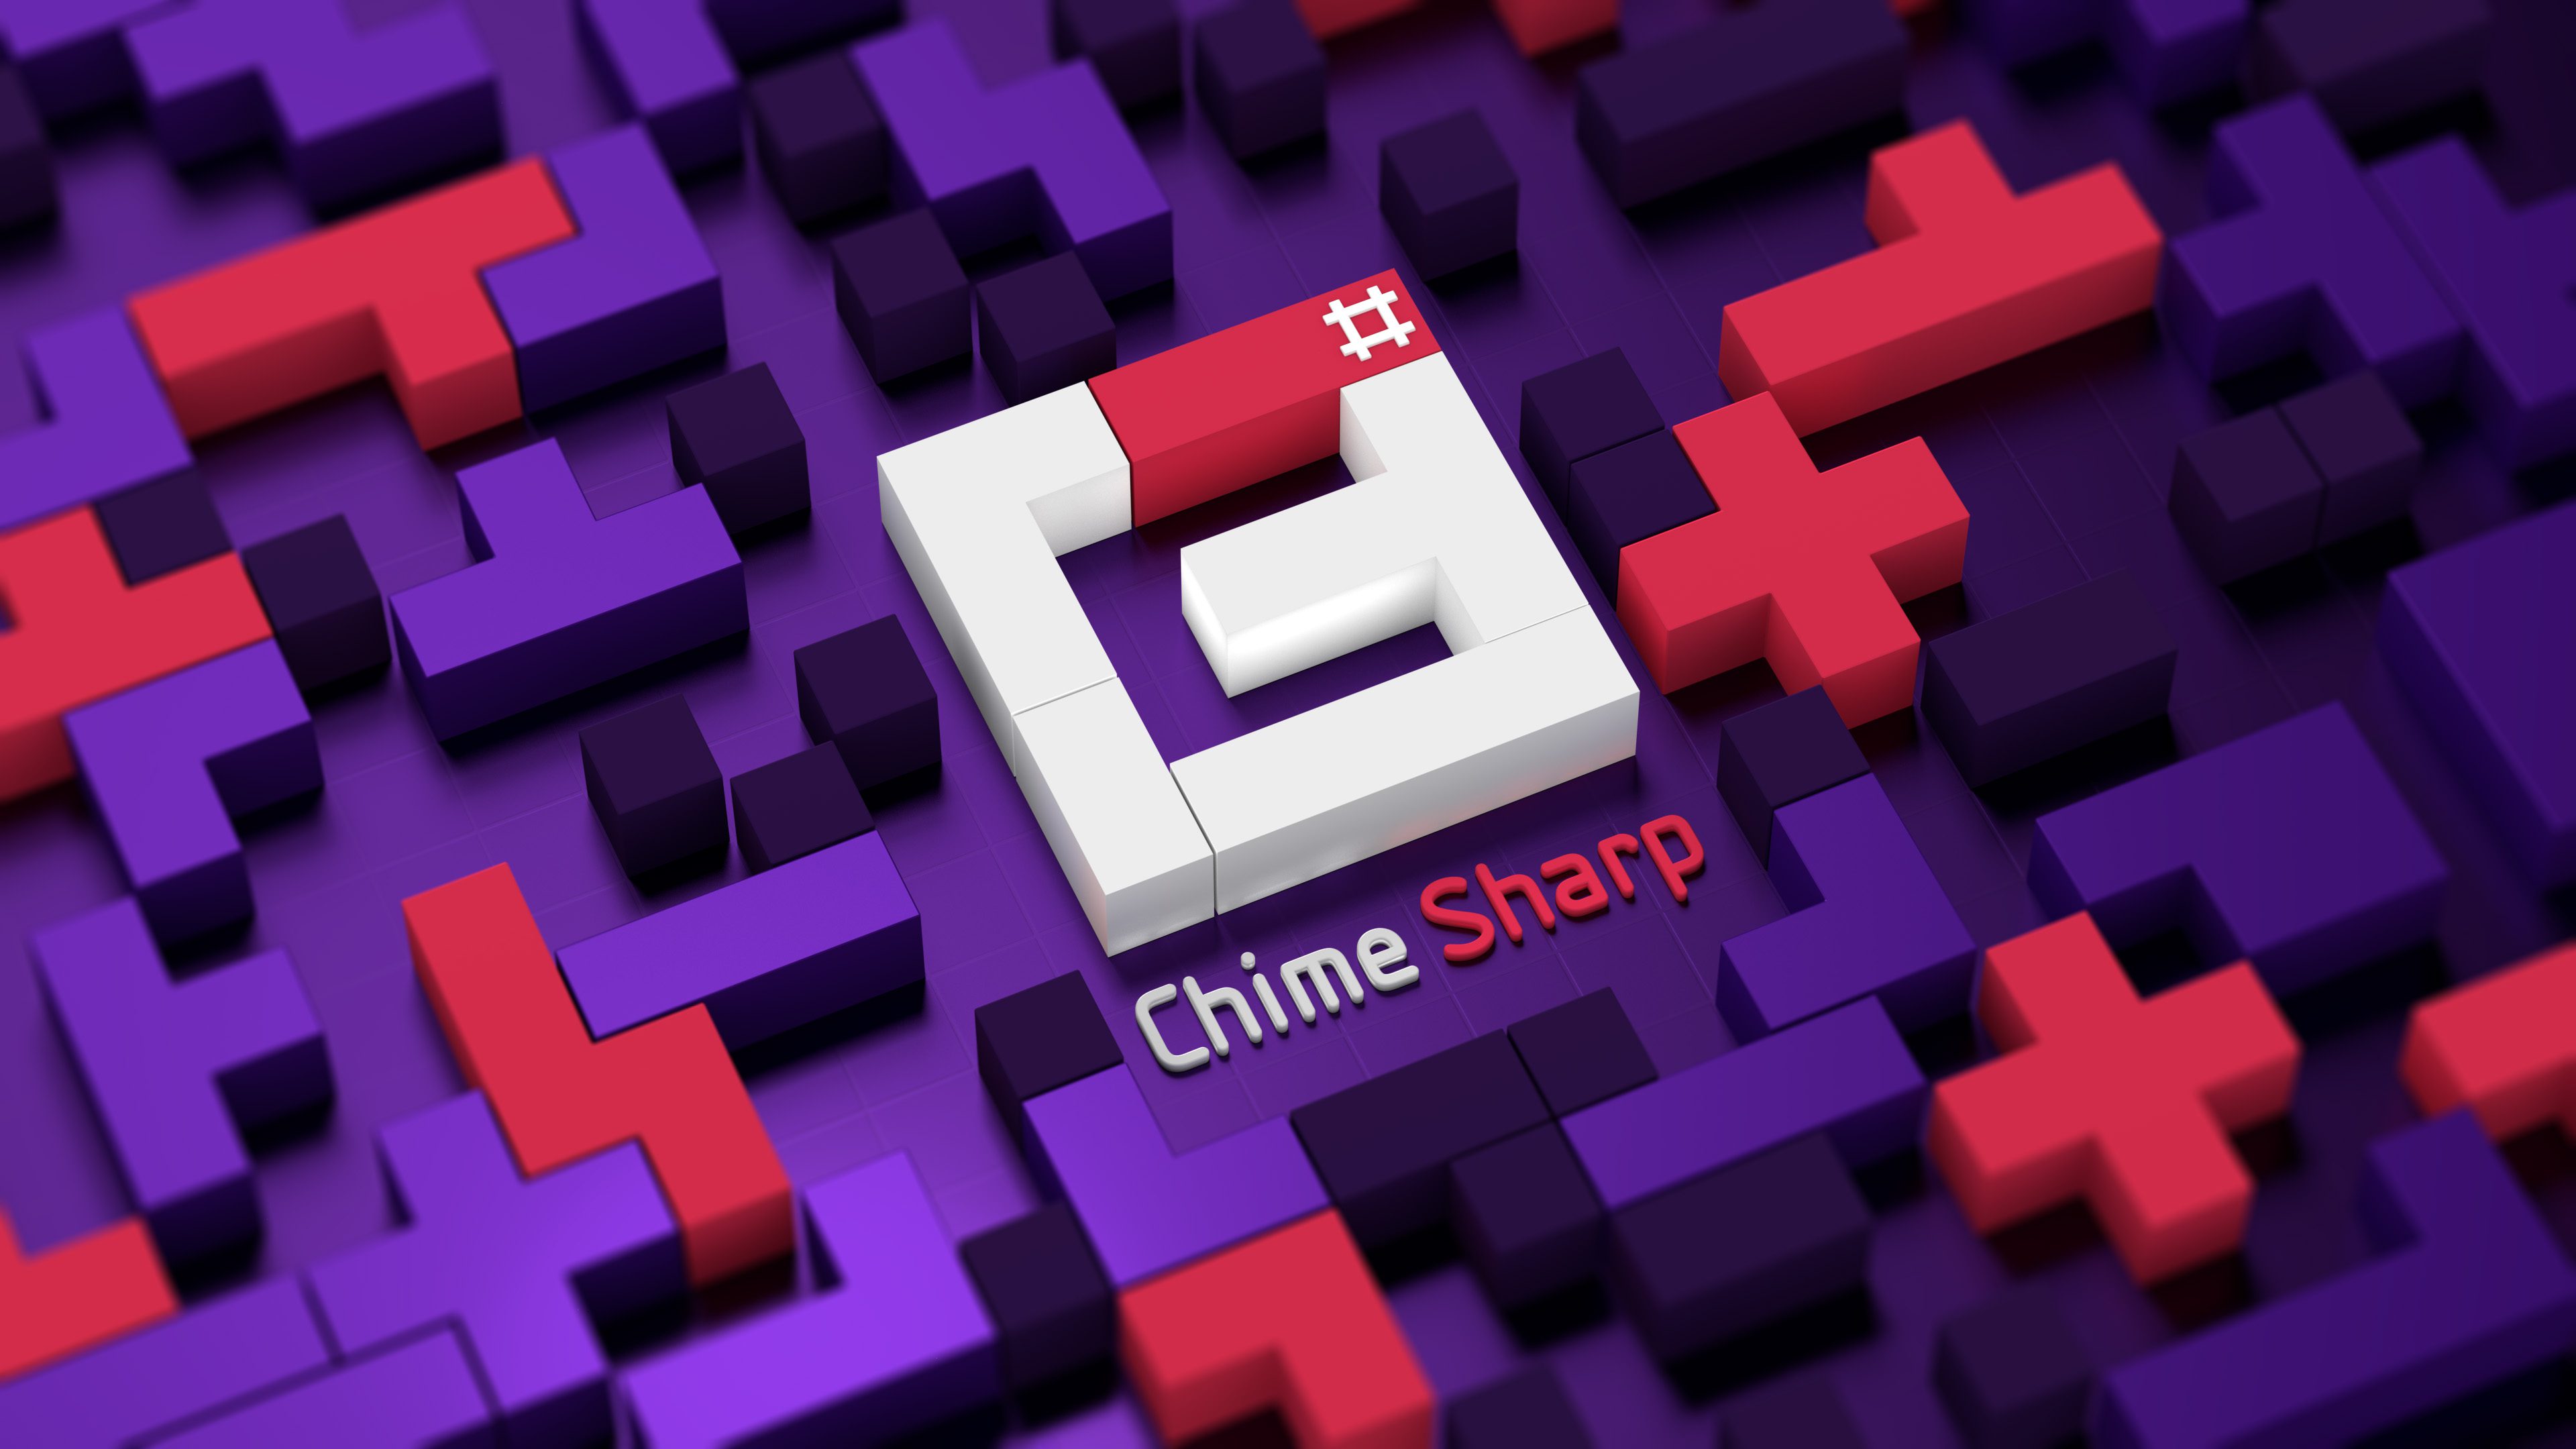 Music puzzle game Chime Sharp dances onto the Nintendo Switch